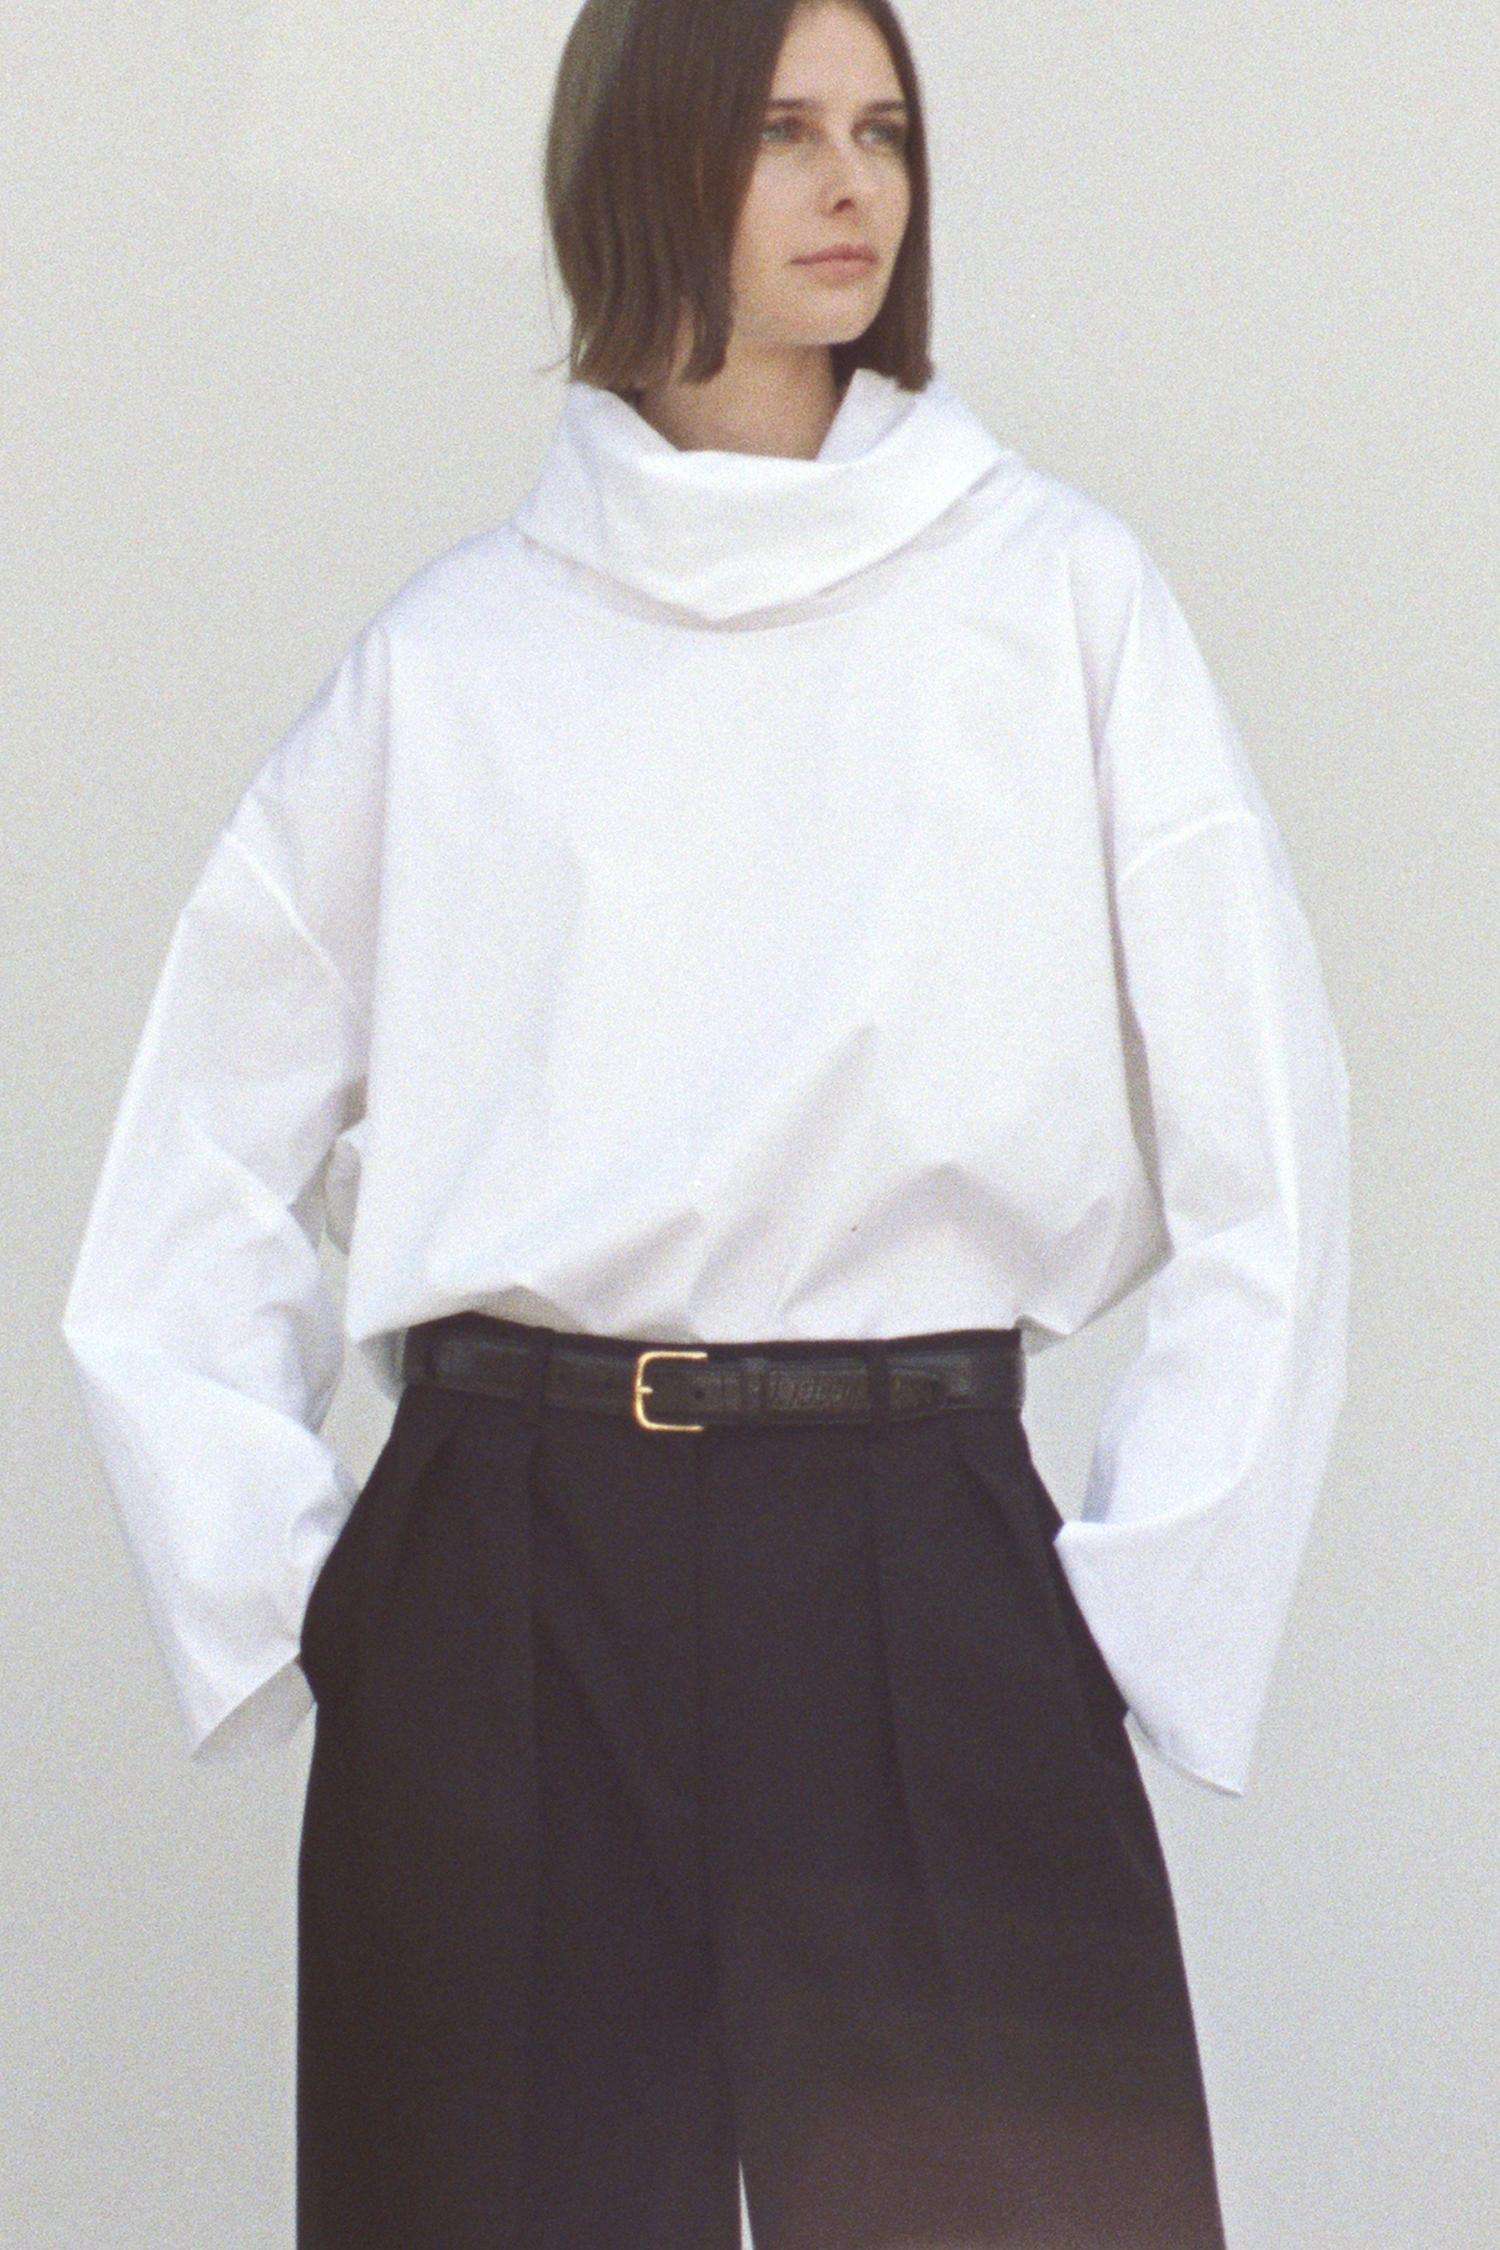 The Row White Shirt and Black Pleated Pants Outfit